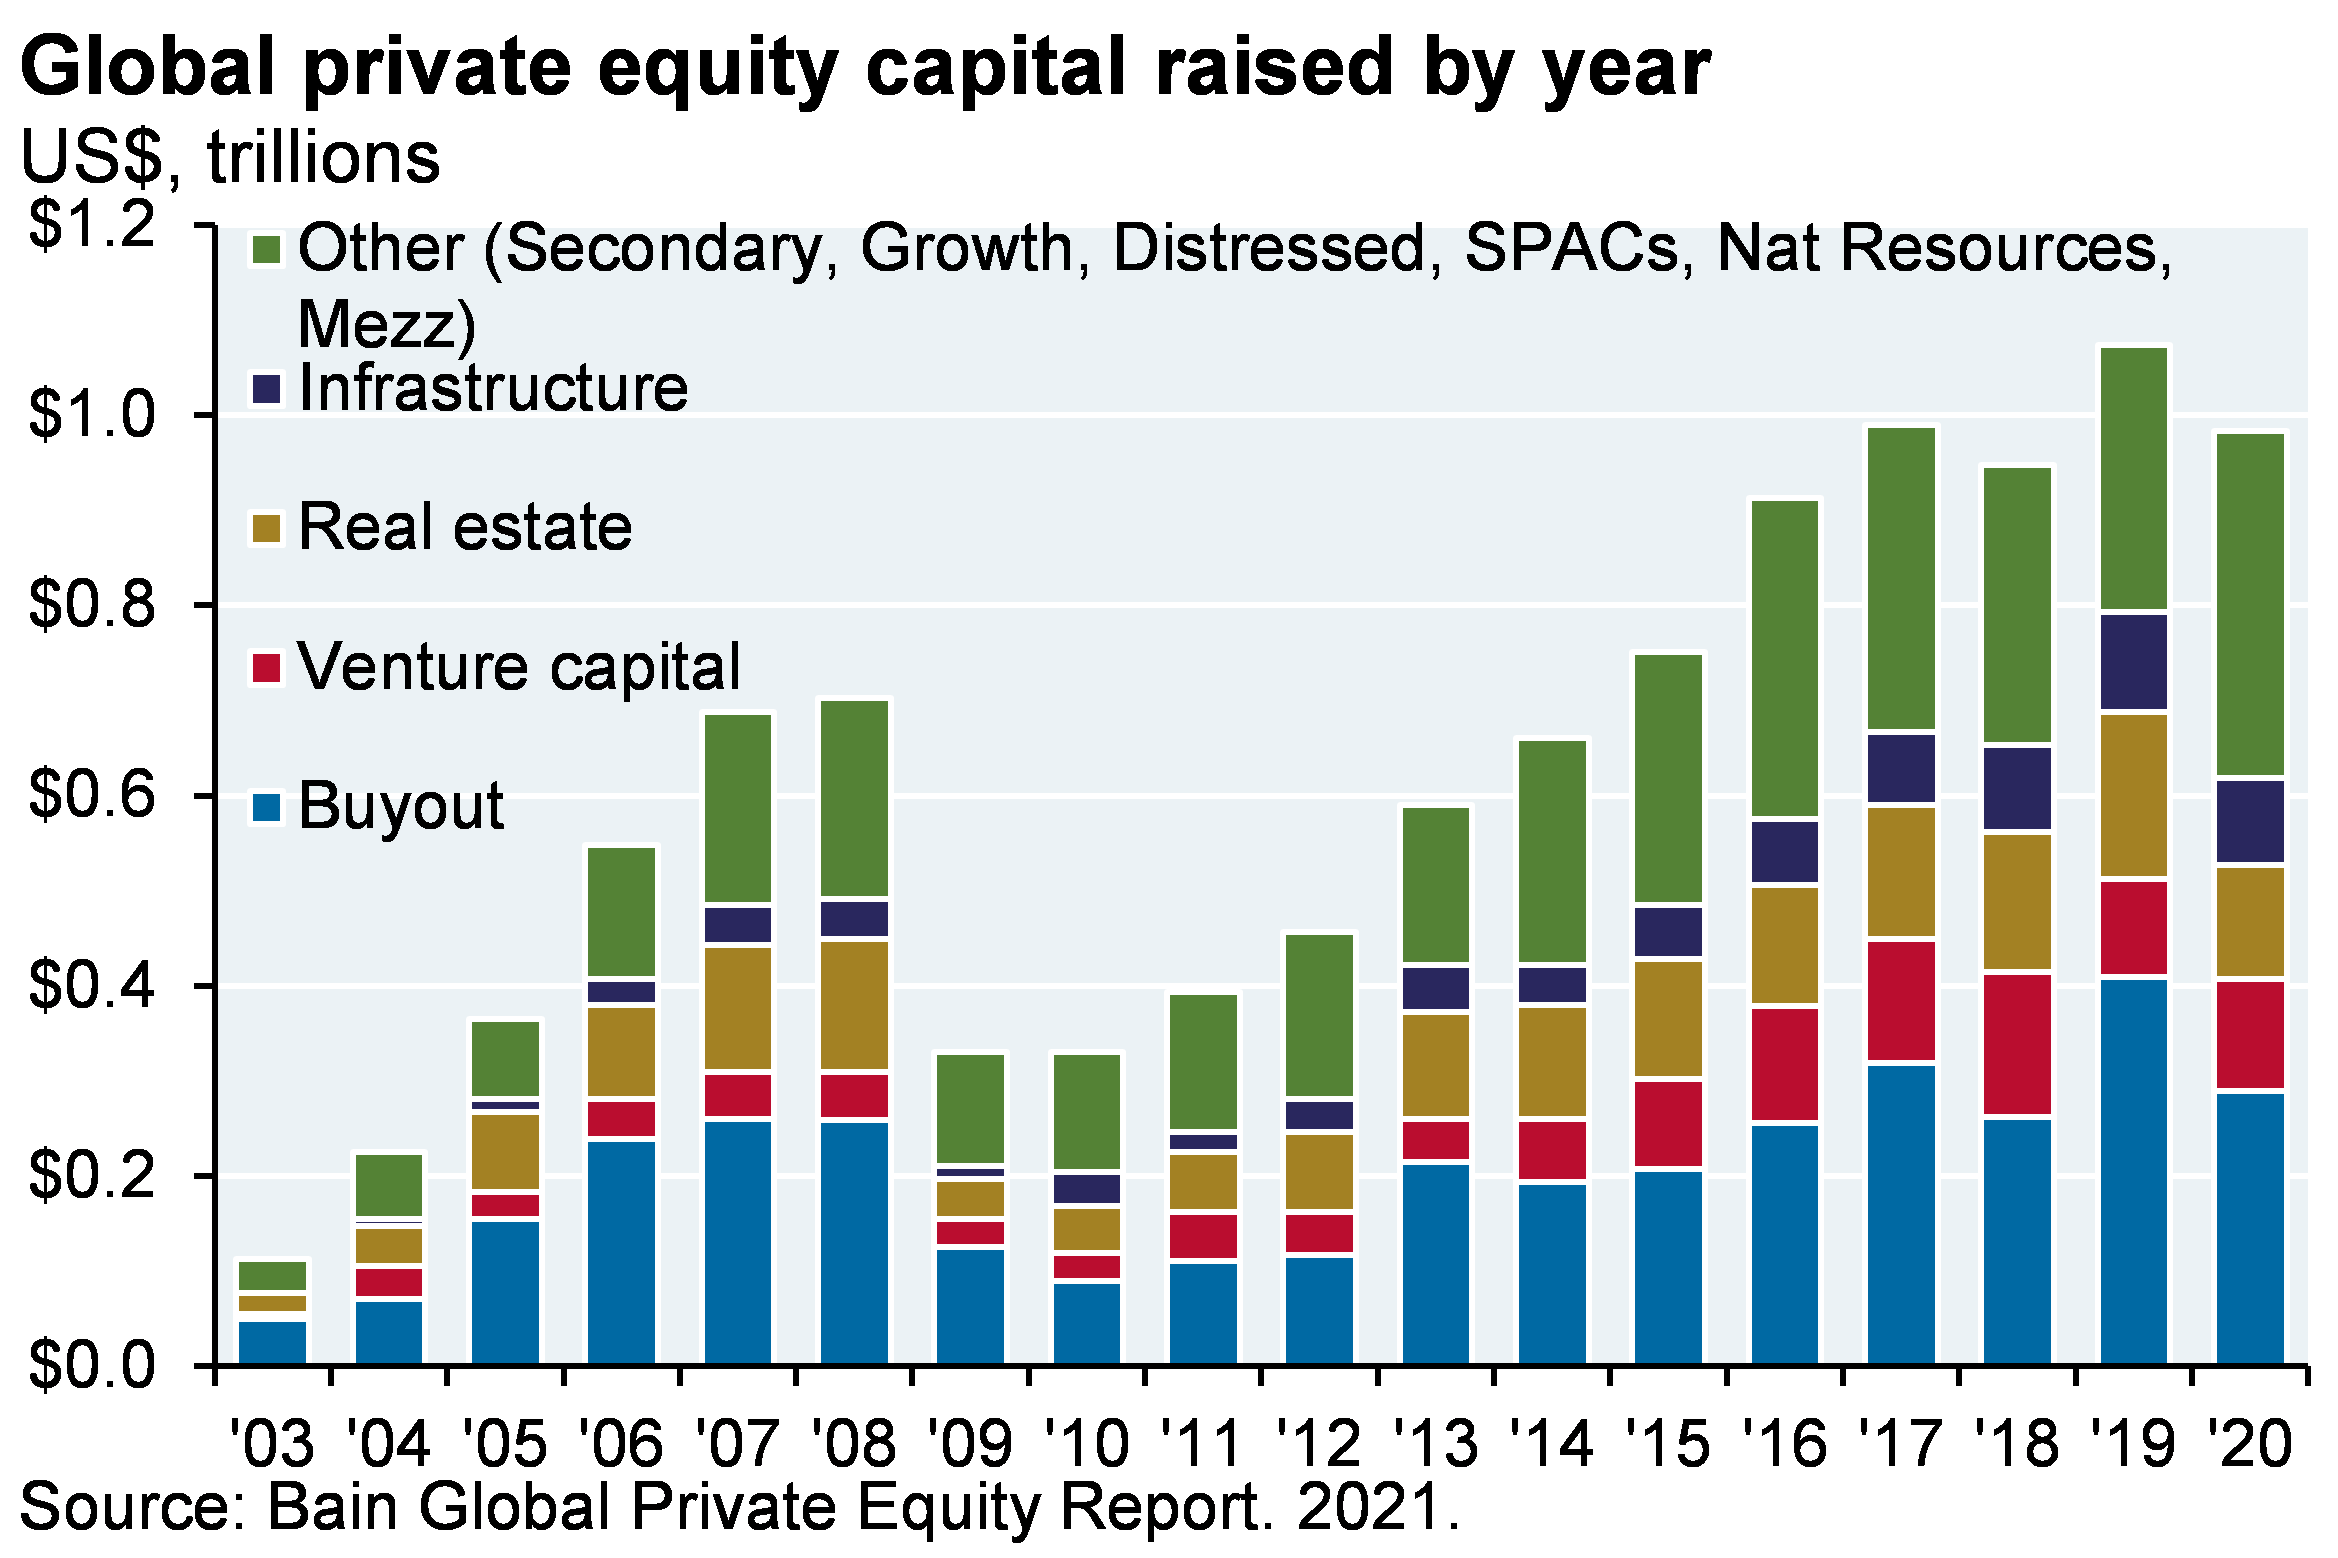 Bar chart which shows global private equity capital raised by year, shown as the breakdown between buyout, venture capital, real estate, infrastructure and Other (including secondary, growth, distressed, SPCs, Natural Resources, Mezzanine). Total private equity capital raised increased from around $0.1 trillion in 2003 to $0.7 trillion in 2008, then declined to $0.3 trillion in 2009. Since then, private equity capital has increased to its latest value of around $1 trillion in 2020. From 2003-2009, Buyout made up nearly half of private equity capital raised, with a quarter made up of “Other”. However, in recent years, “Other” makes up about half to a third of private equity capital raised, with “Buyout’ representing around a third and the remaining third split fairly evenly across real estate, venture capital and infrastructure.